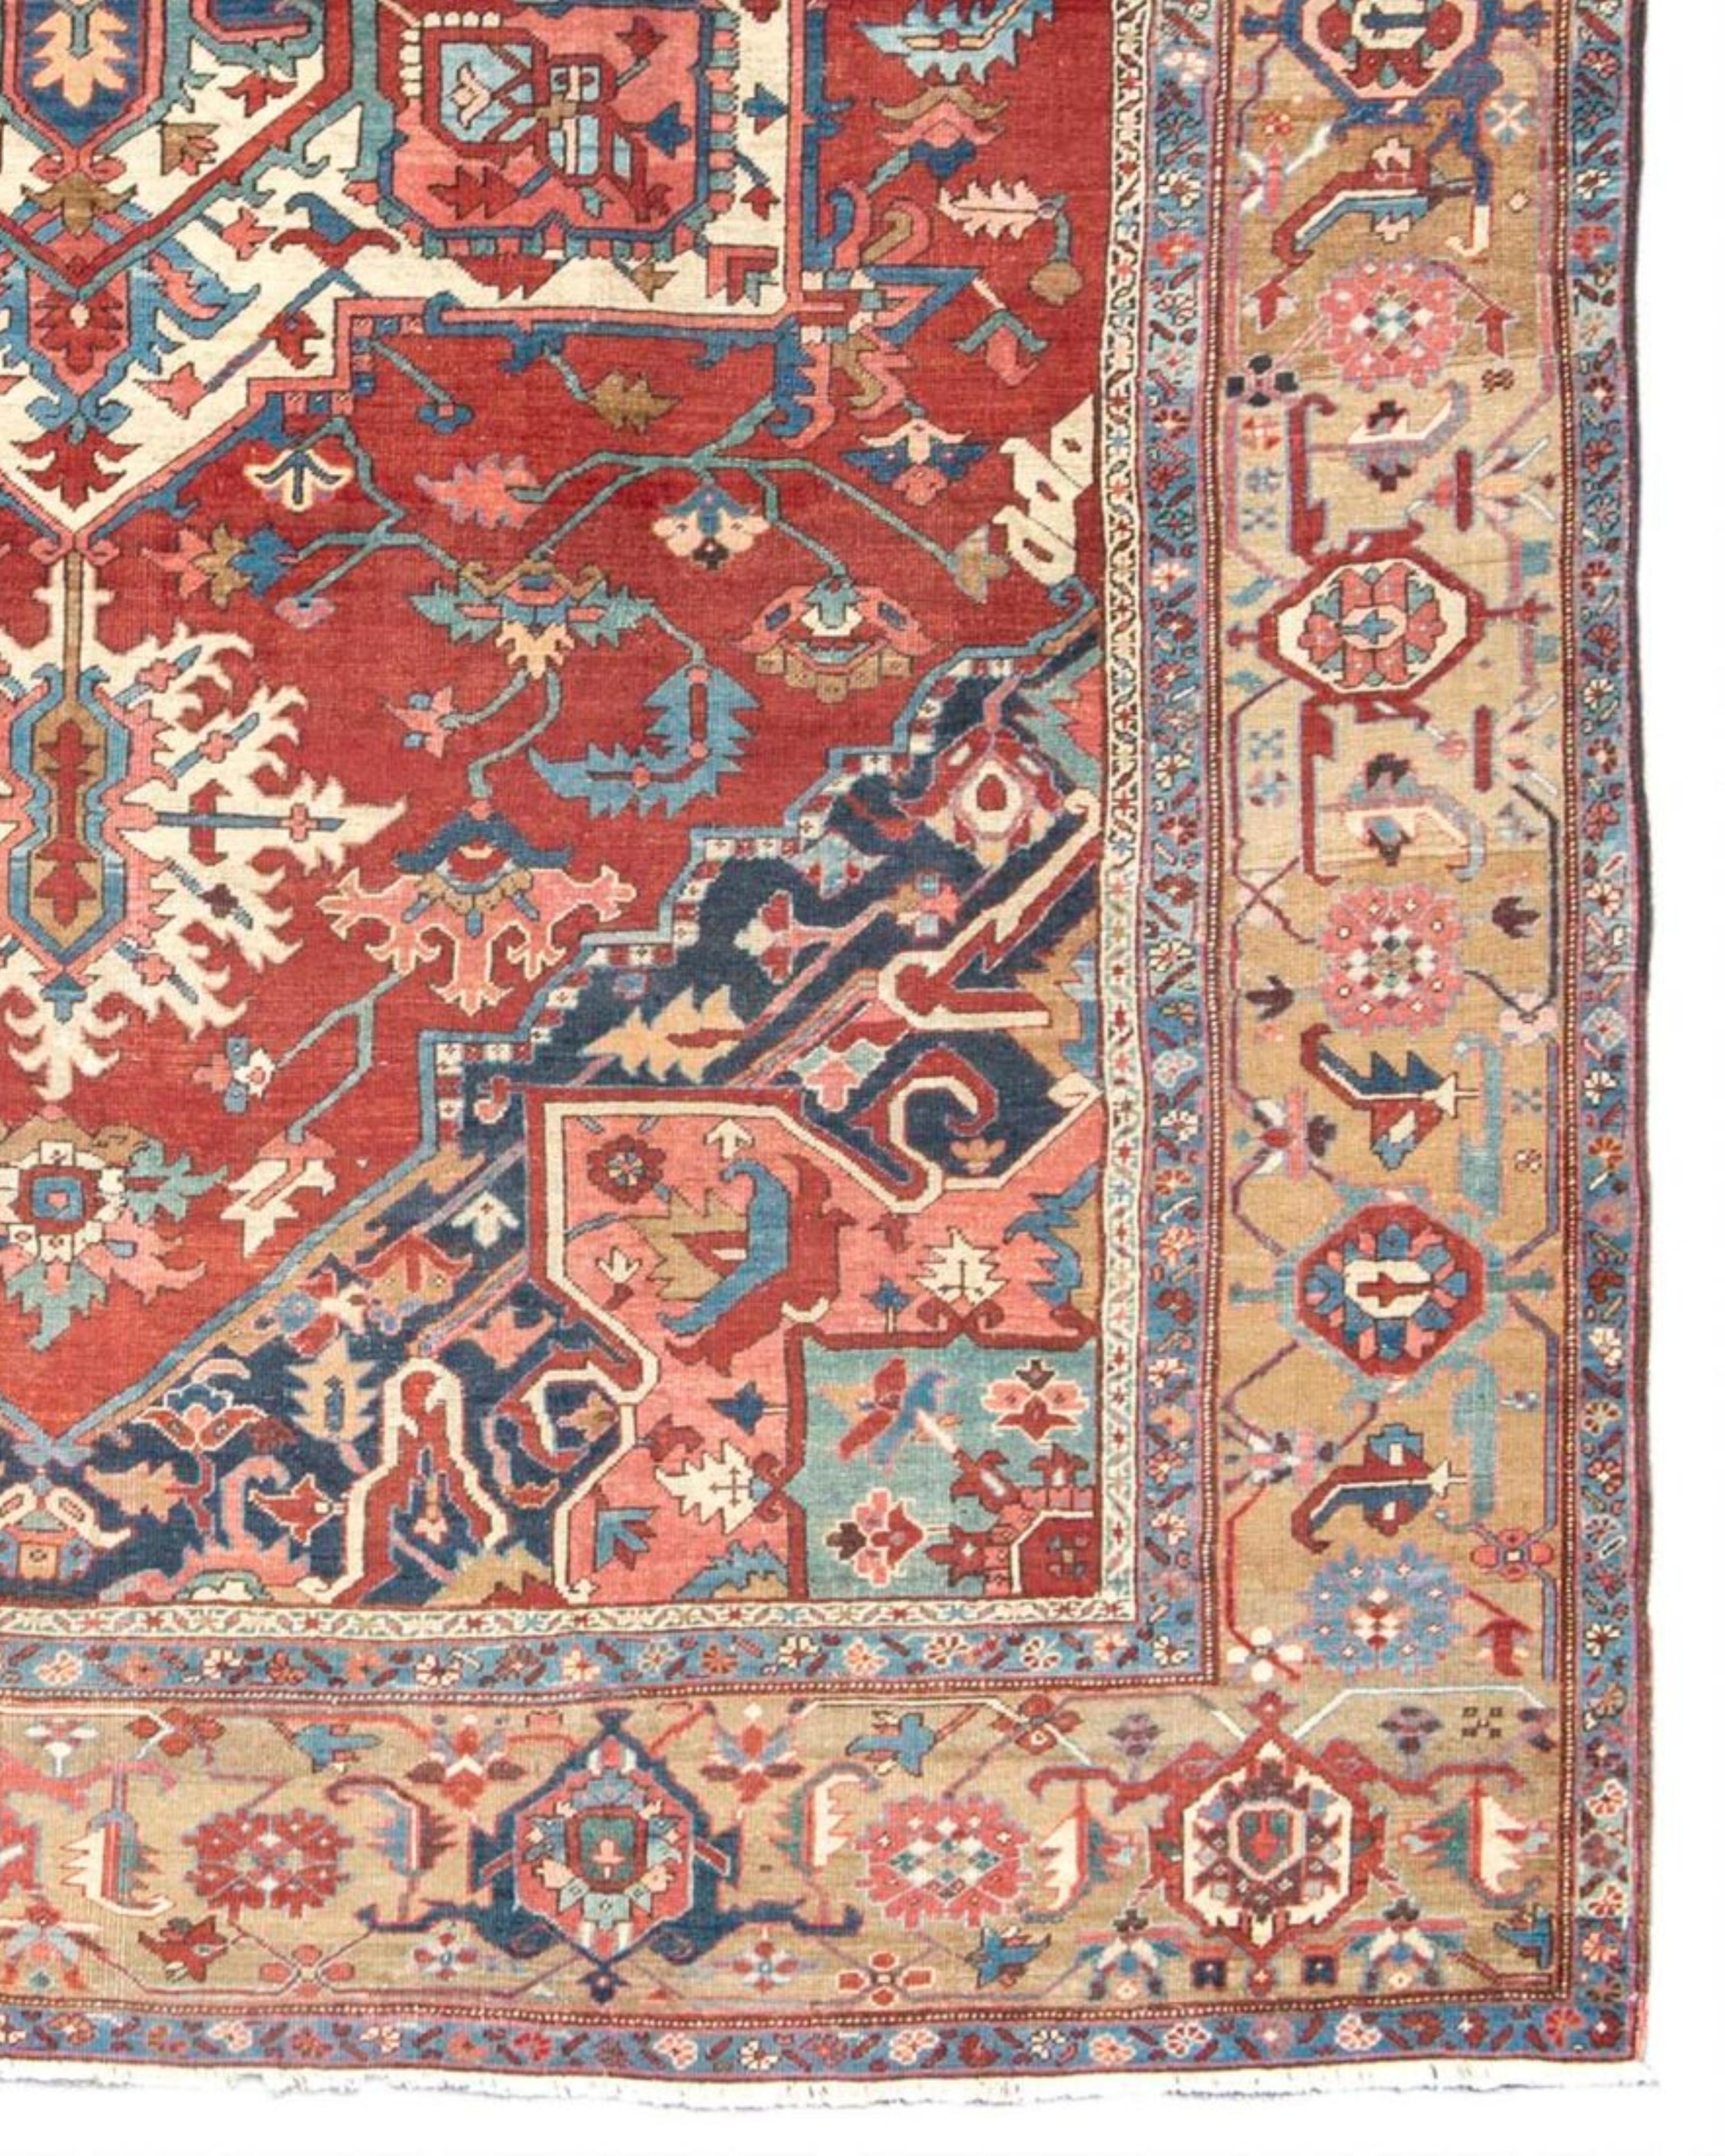 Antique Large Persian Serapi Carpet Rug, c. 1900

Serapi rugs and carpets were woven in the Heriz district of Northwest Persia starting in the Mid-19th century in response to a great increase in demand for rugs internationally. Prior to that, there